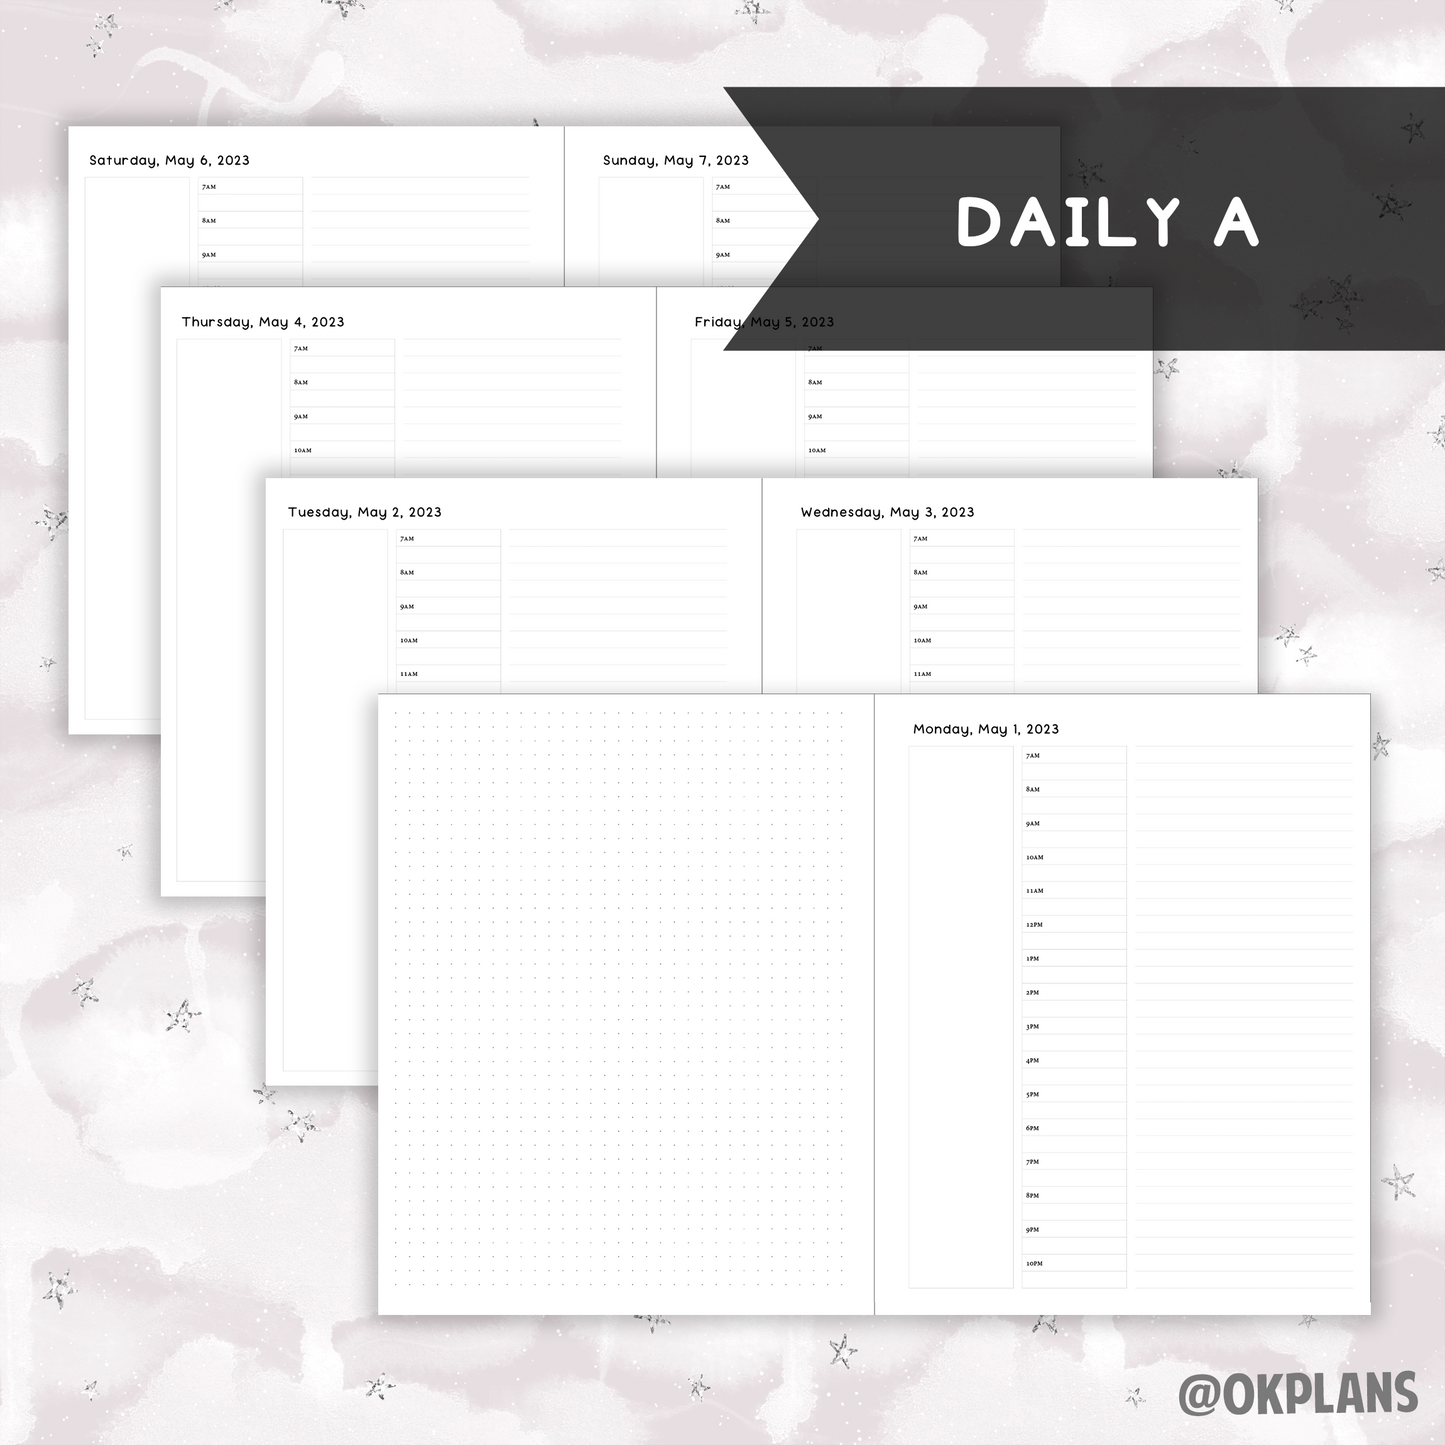 *DATED* Classic Hybrid Planner - Pick Monthly and Weekly Option